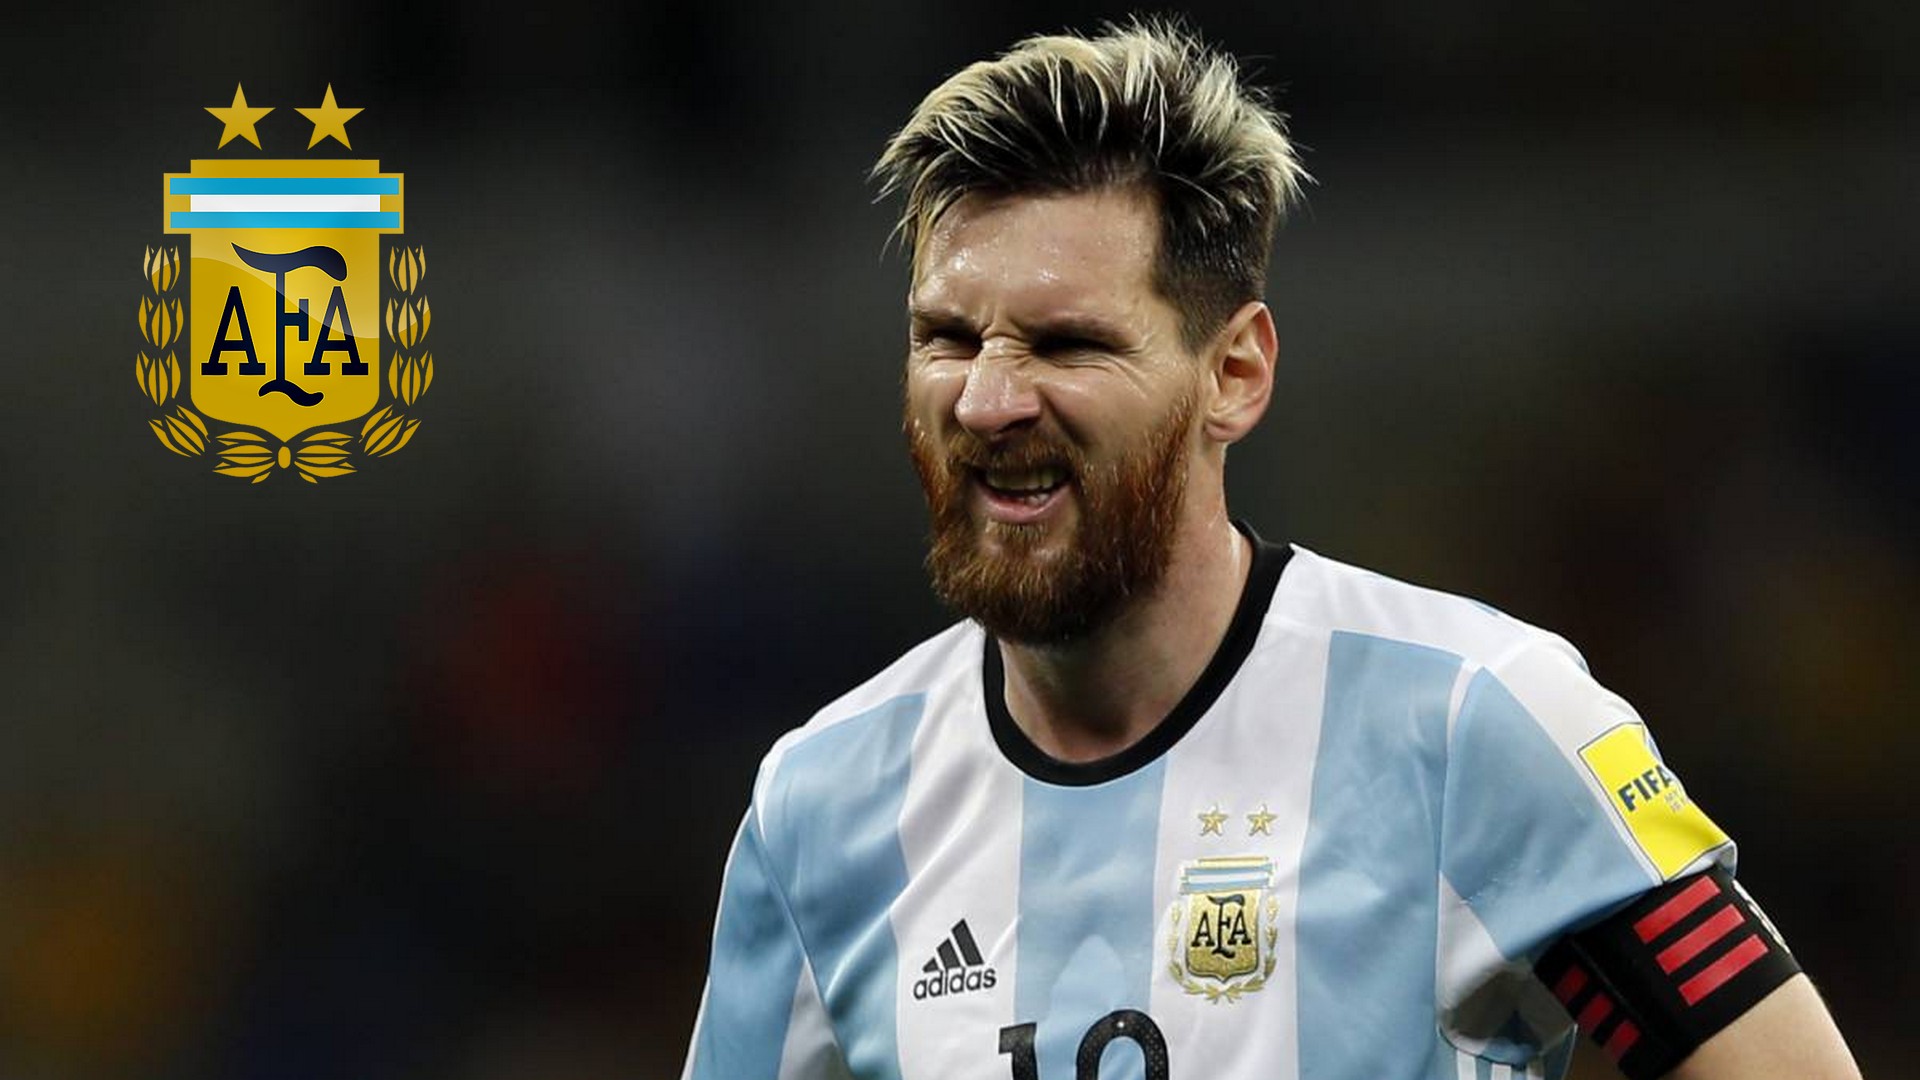 Messi Argentina Desktop Backgrounds With Resolution 1920X1080 pixel. You can make this wallpaper for your Desktop Computer Backgrounds, Mac Wallpapers, Android Lock screen or iPhone Screensavers